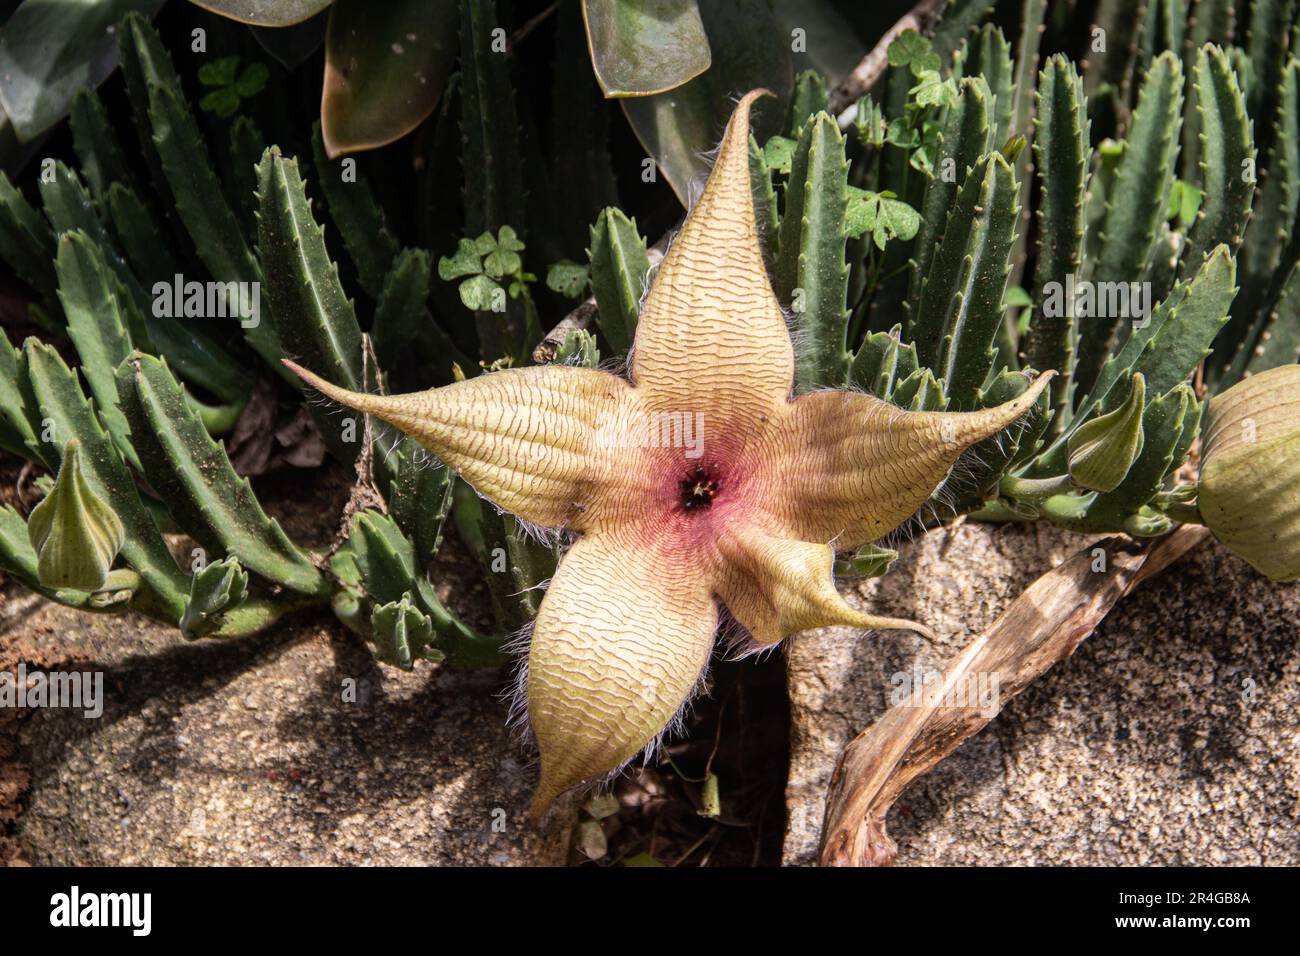 Stapelia gigantea is a species of flowering plant in the genus Stapelia of the family Apocynaceae. Common names include Zulu giant and carrion Stock Photo